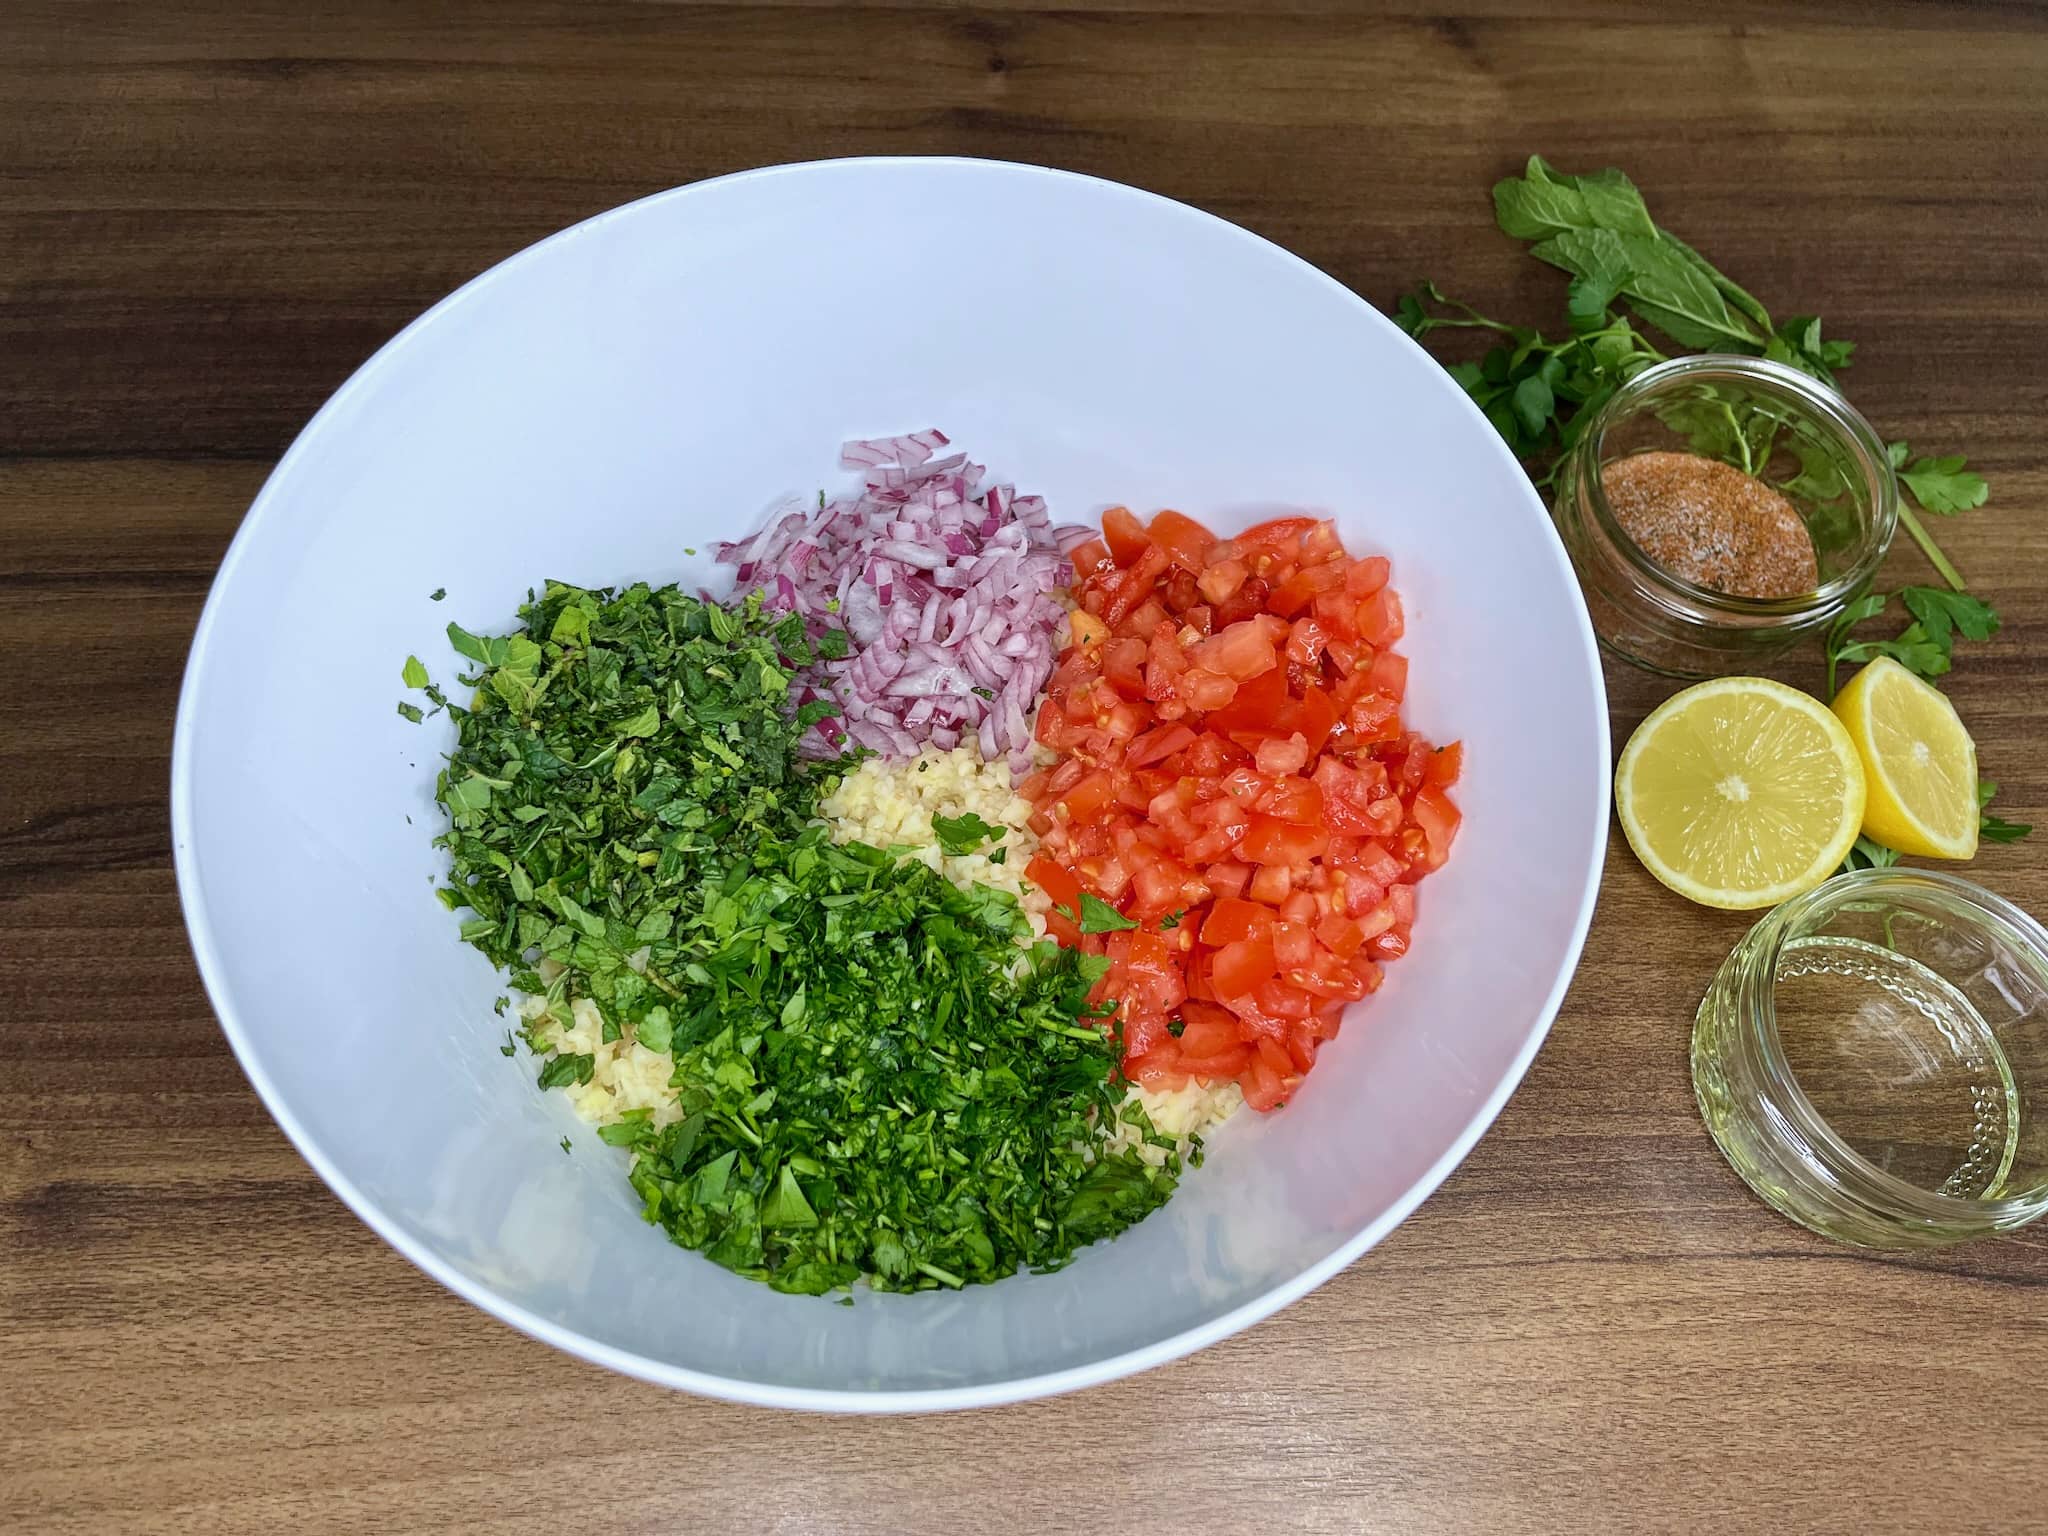 Chopped ingredients ready to make Tabbouleh